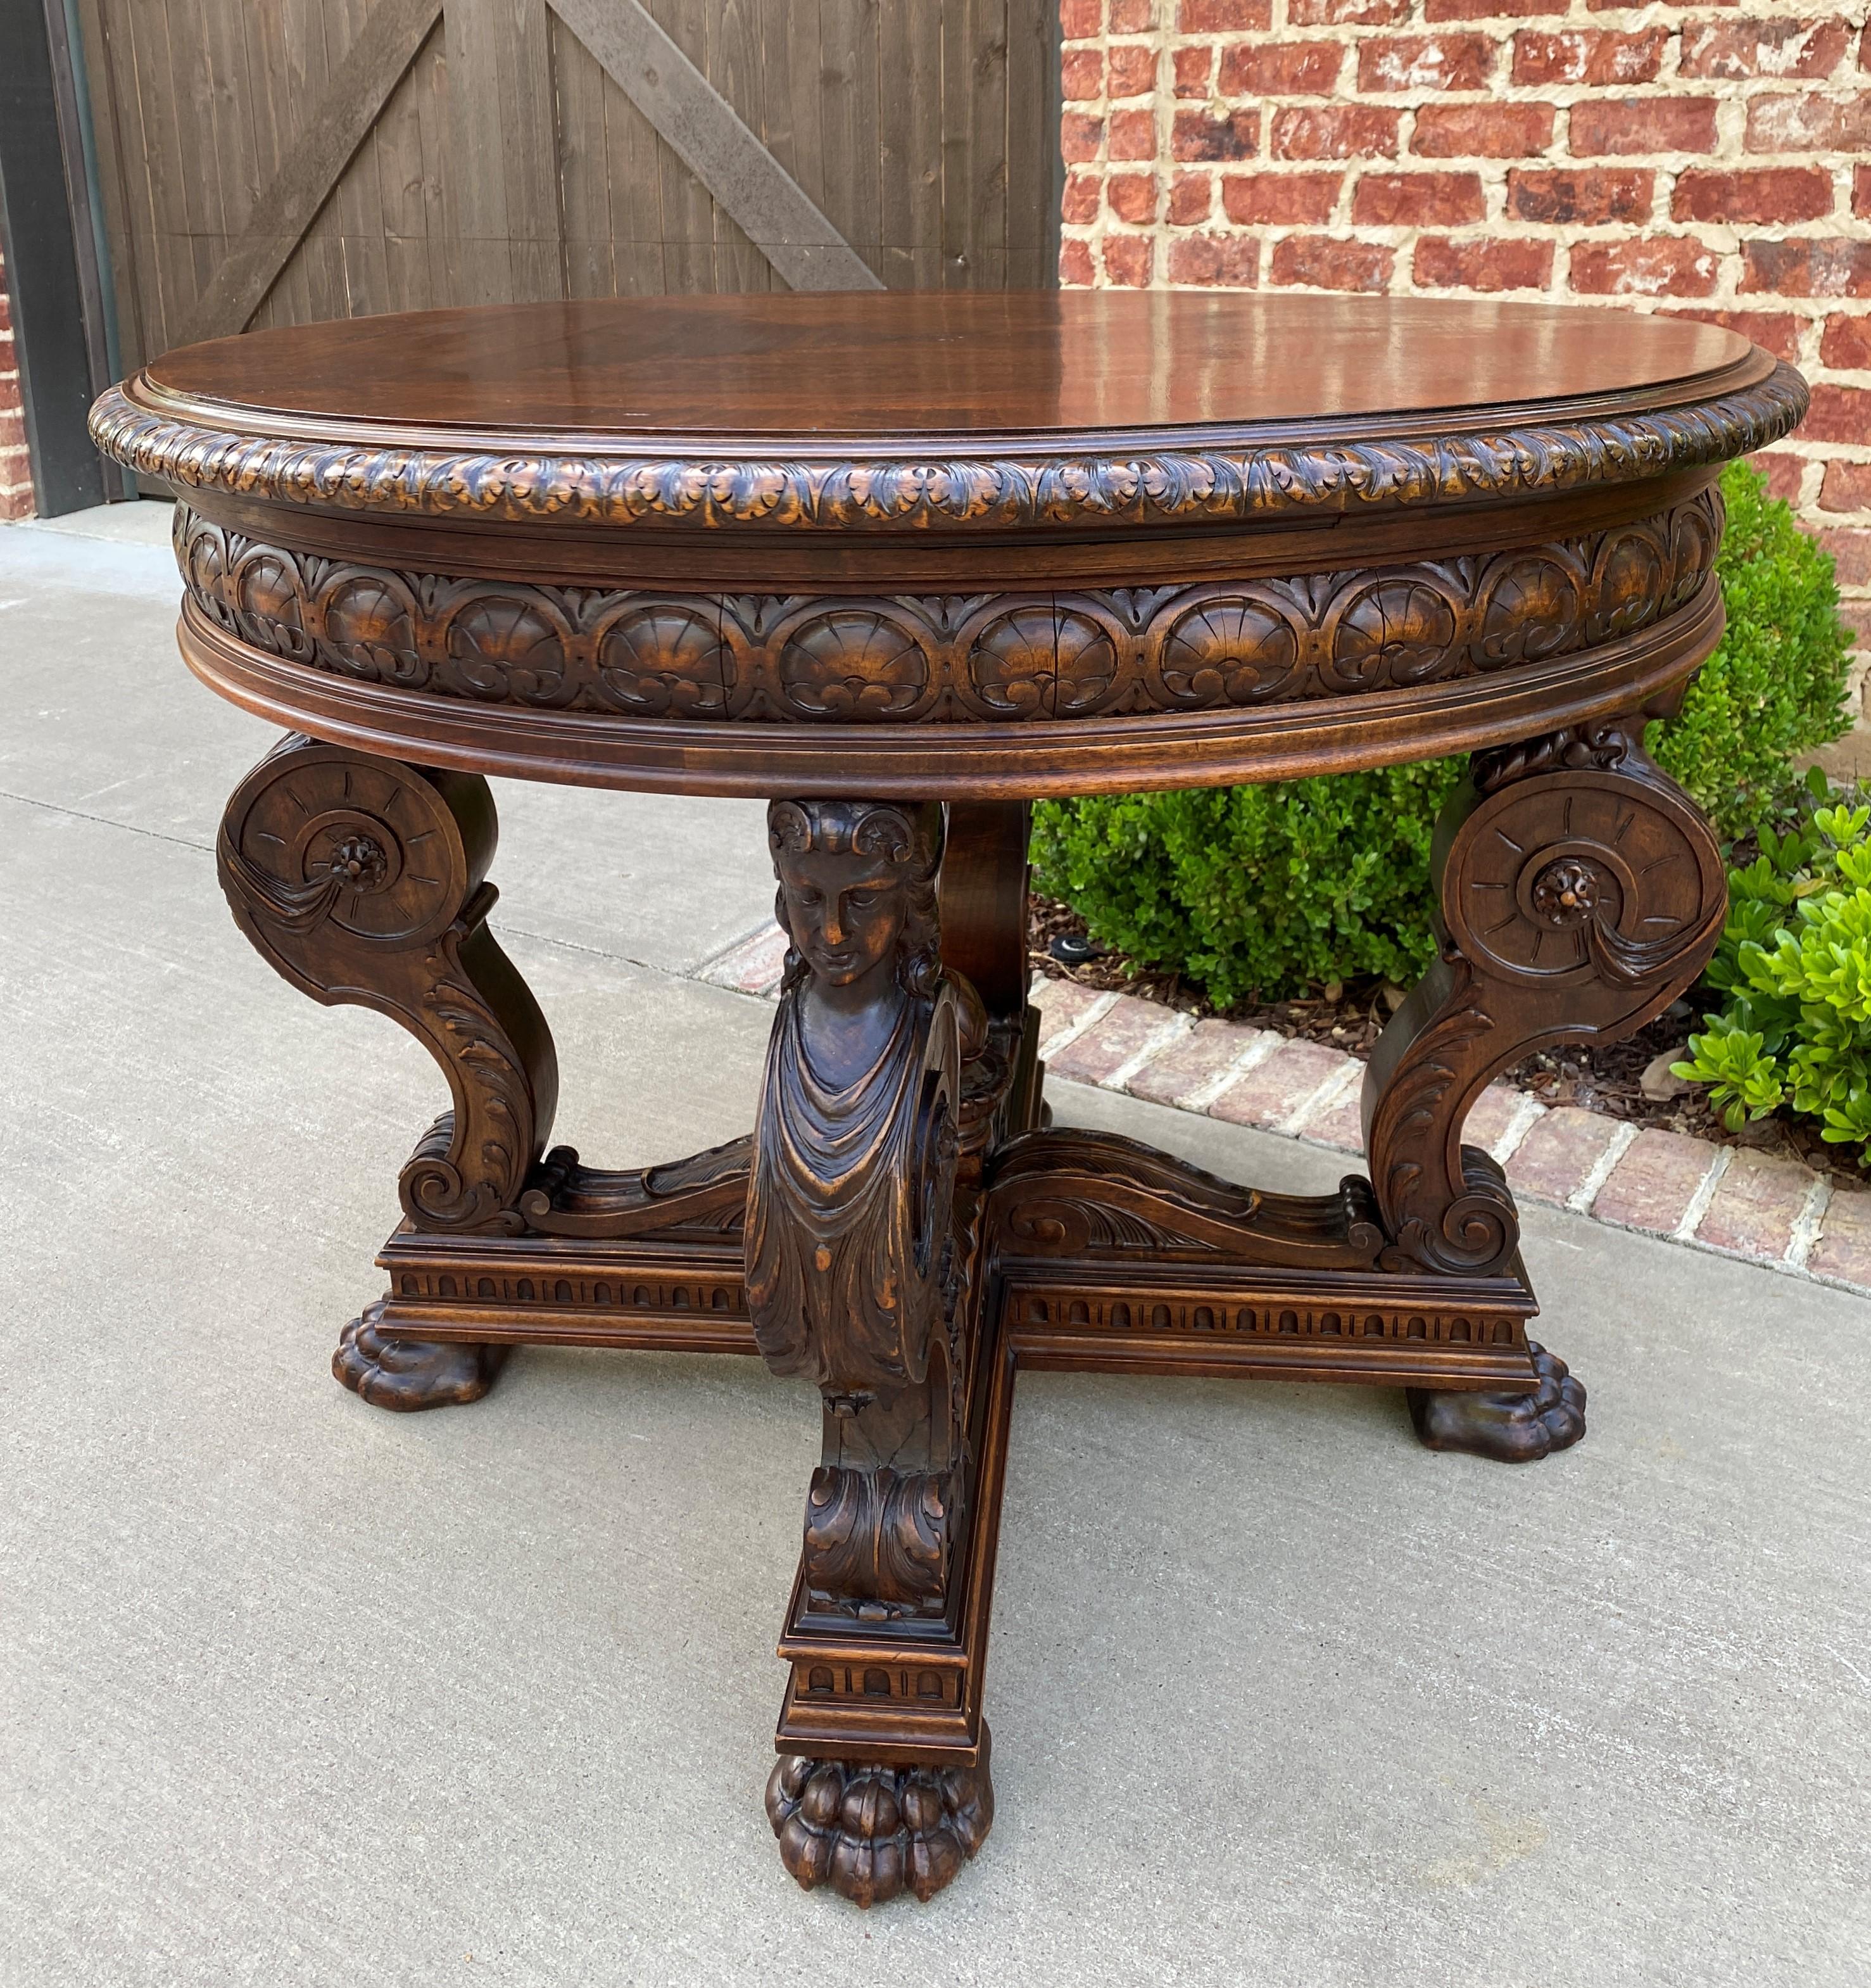 19th Century Antique French Round Table Entry Center Parlor Table Renaissance Revival 19th C